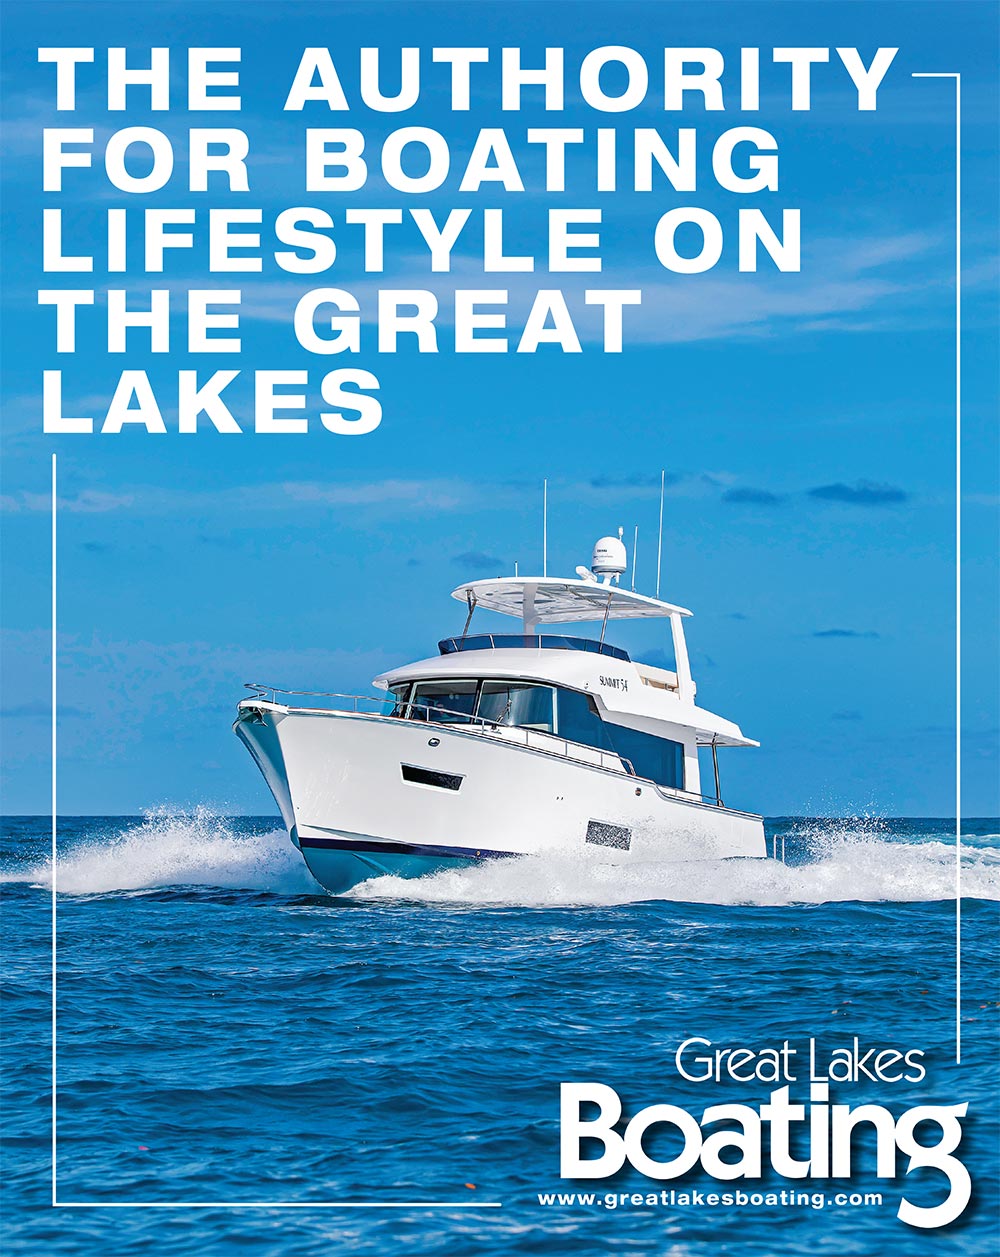 Great Lakes Boating Advertisement